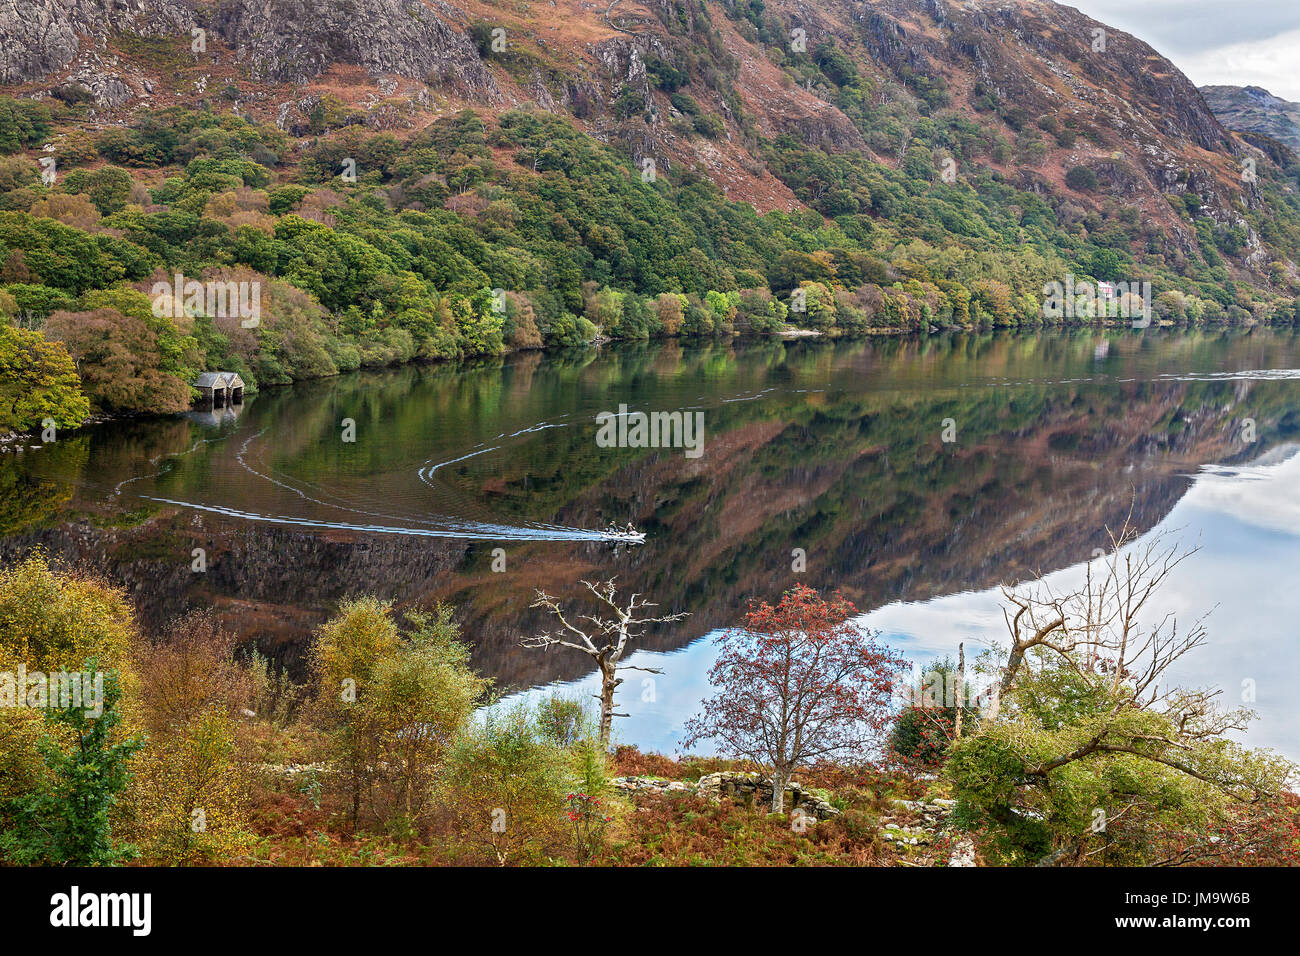 Reflections in Llyn Dinas with fishermen in a boat Nant Gwynant valley near Beddgelert Snowdonia National Park North Wales UK October 50500 Stock Photo